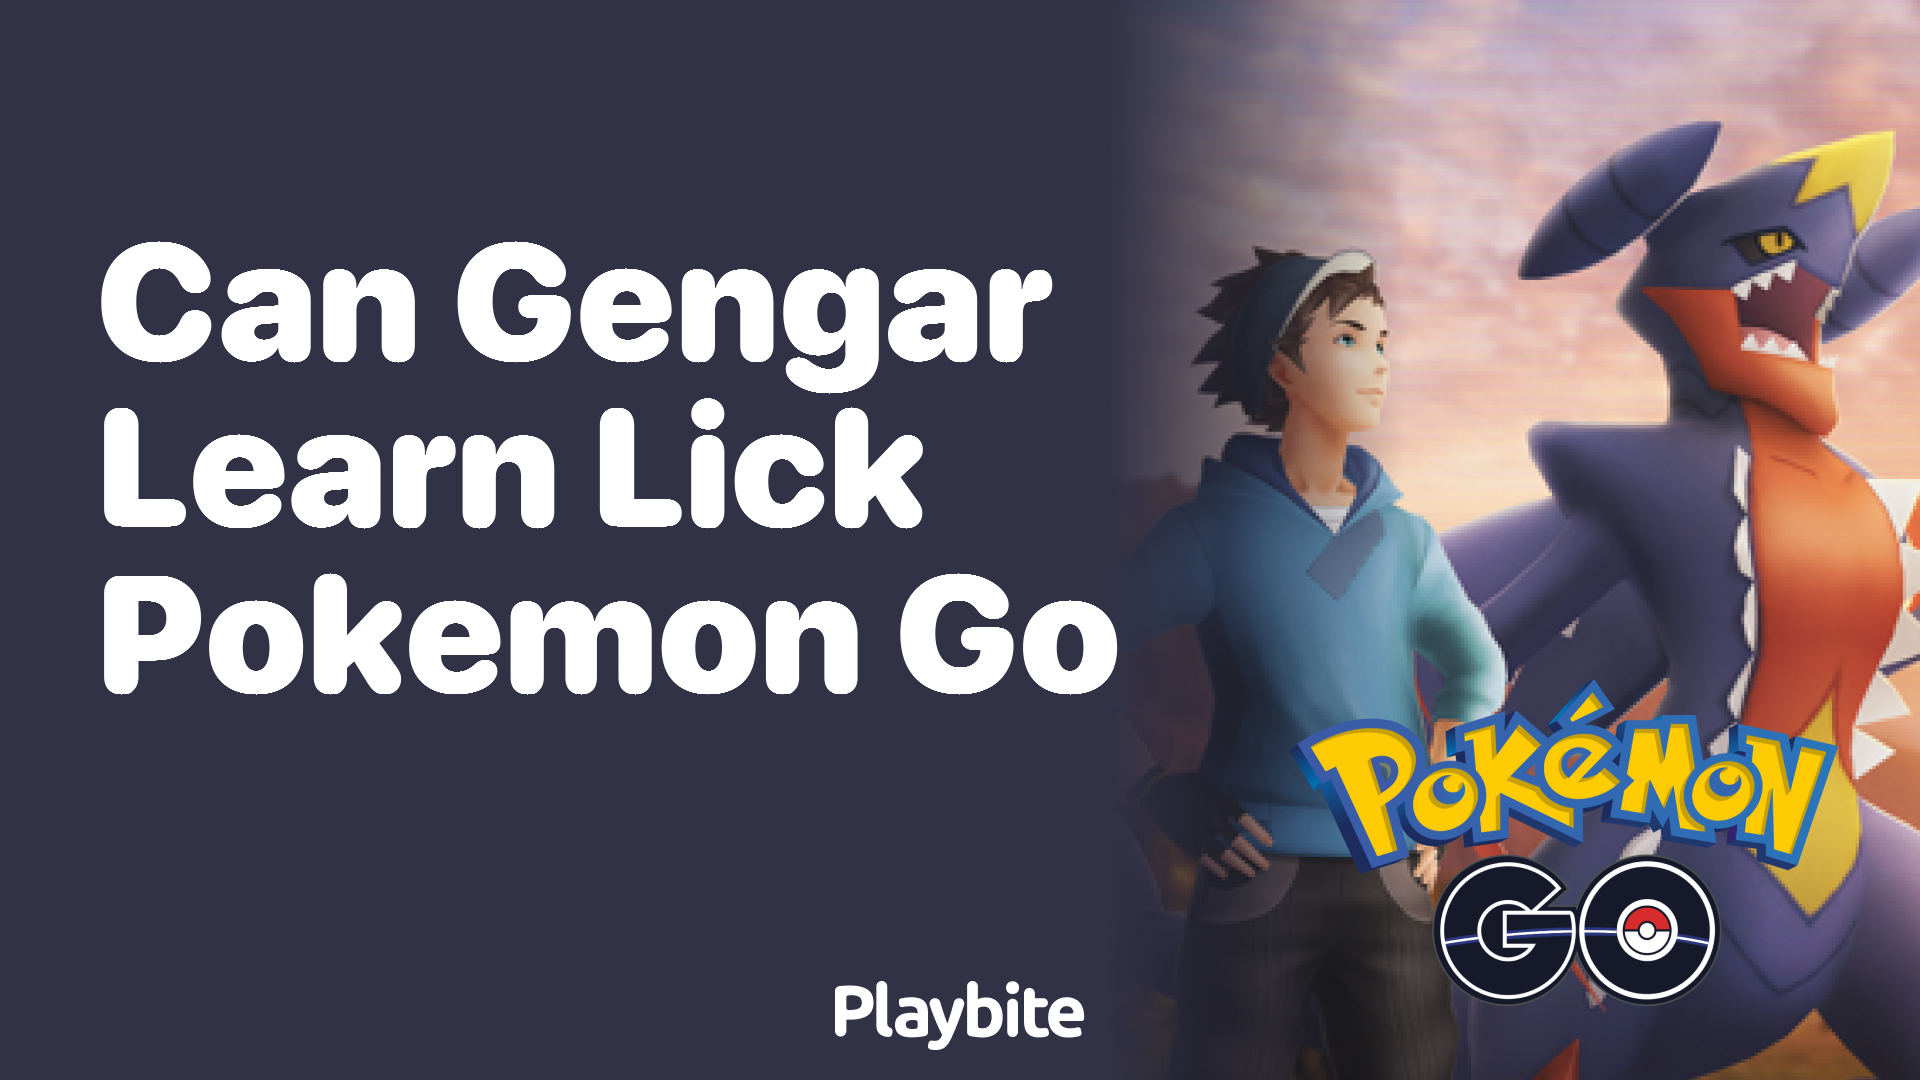 Can Gengar Learn Lick in Pokemon GO? Find Out Here!